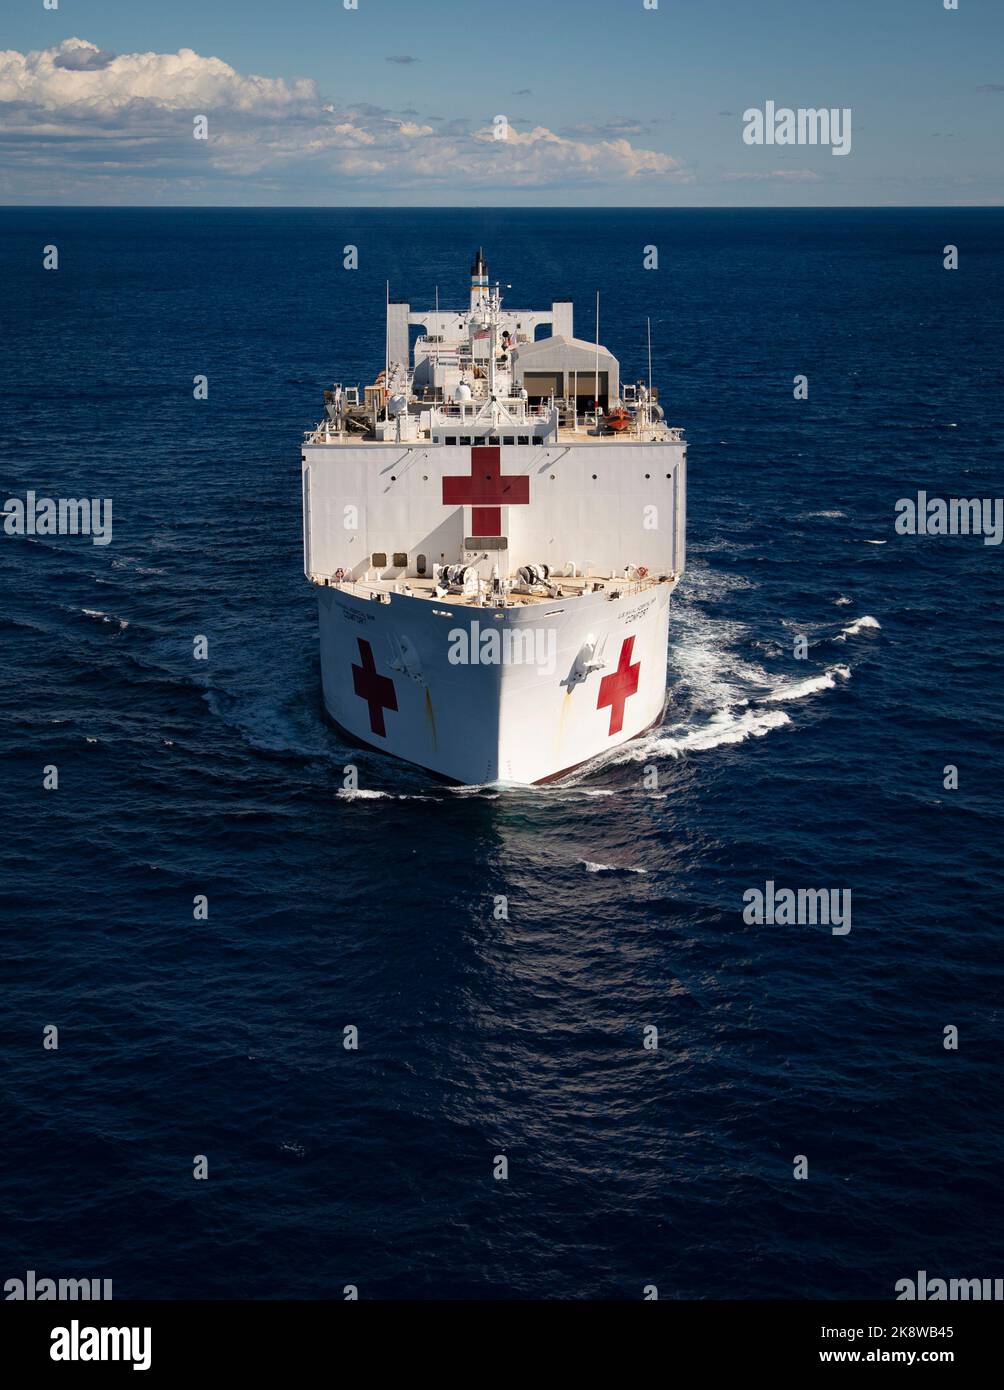 221021-N-MY642-1052  ATLANTIC OCEAN (October 21, 2022) The hospital ship USNS Comfort (T-AH 20) steams through the ocean as part of the transit south from Nofolk, Va. Comfort is deployed to U.S. 4th Fleet in support of Continuing Promise 2022, a humanitarian assistance and goodwill mission conducting direct medical care, expeditionary veterinary care, and subject matter expert exchanges with five partner nations in the Caribbean, Central and South America. (U.S. Navy photo by Mass Communication Specialist 1st Class Donald R. White Jr.) Stock Photo